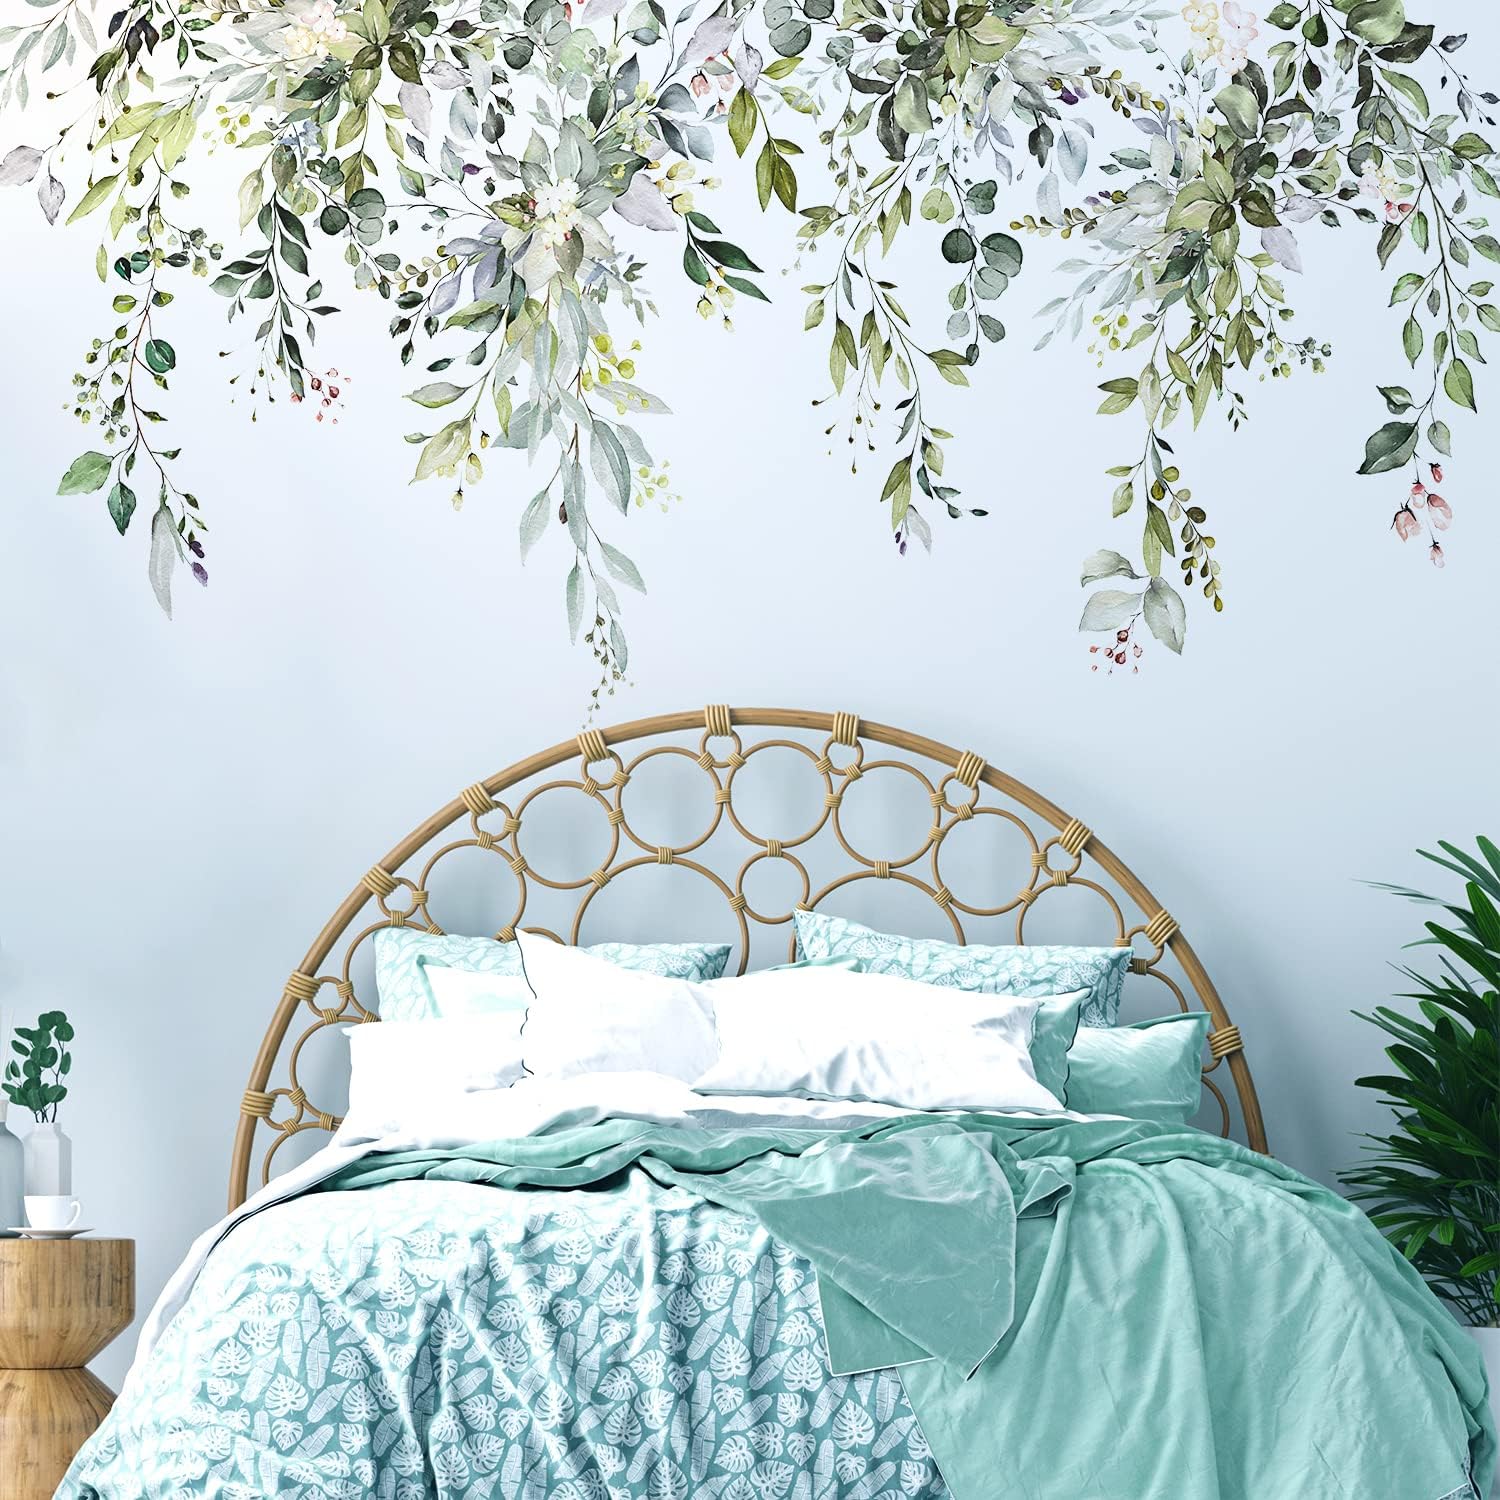 VePret Green Plants Leaves Wall Decals Peel and Stick, Large Floral Flower Leaf Vinyl Wall Stickers, Removable Vine Home Decor Art for Bedroom Living Room Classroom Office